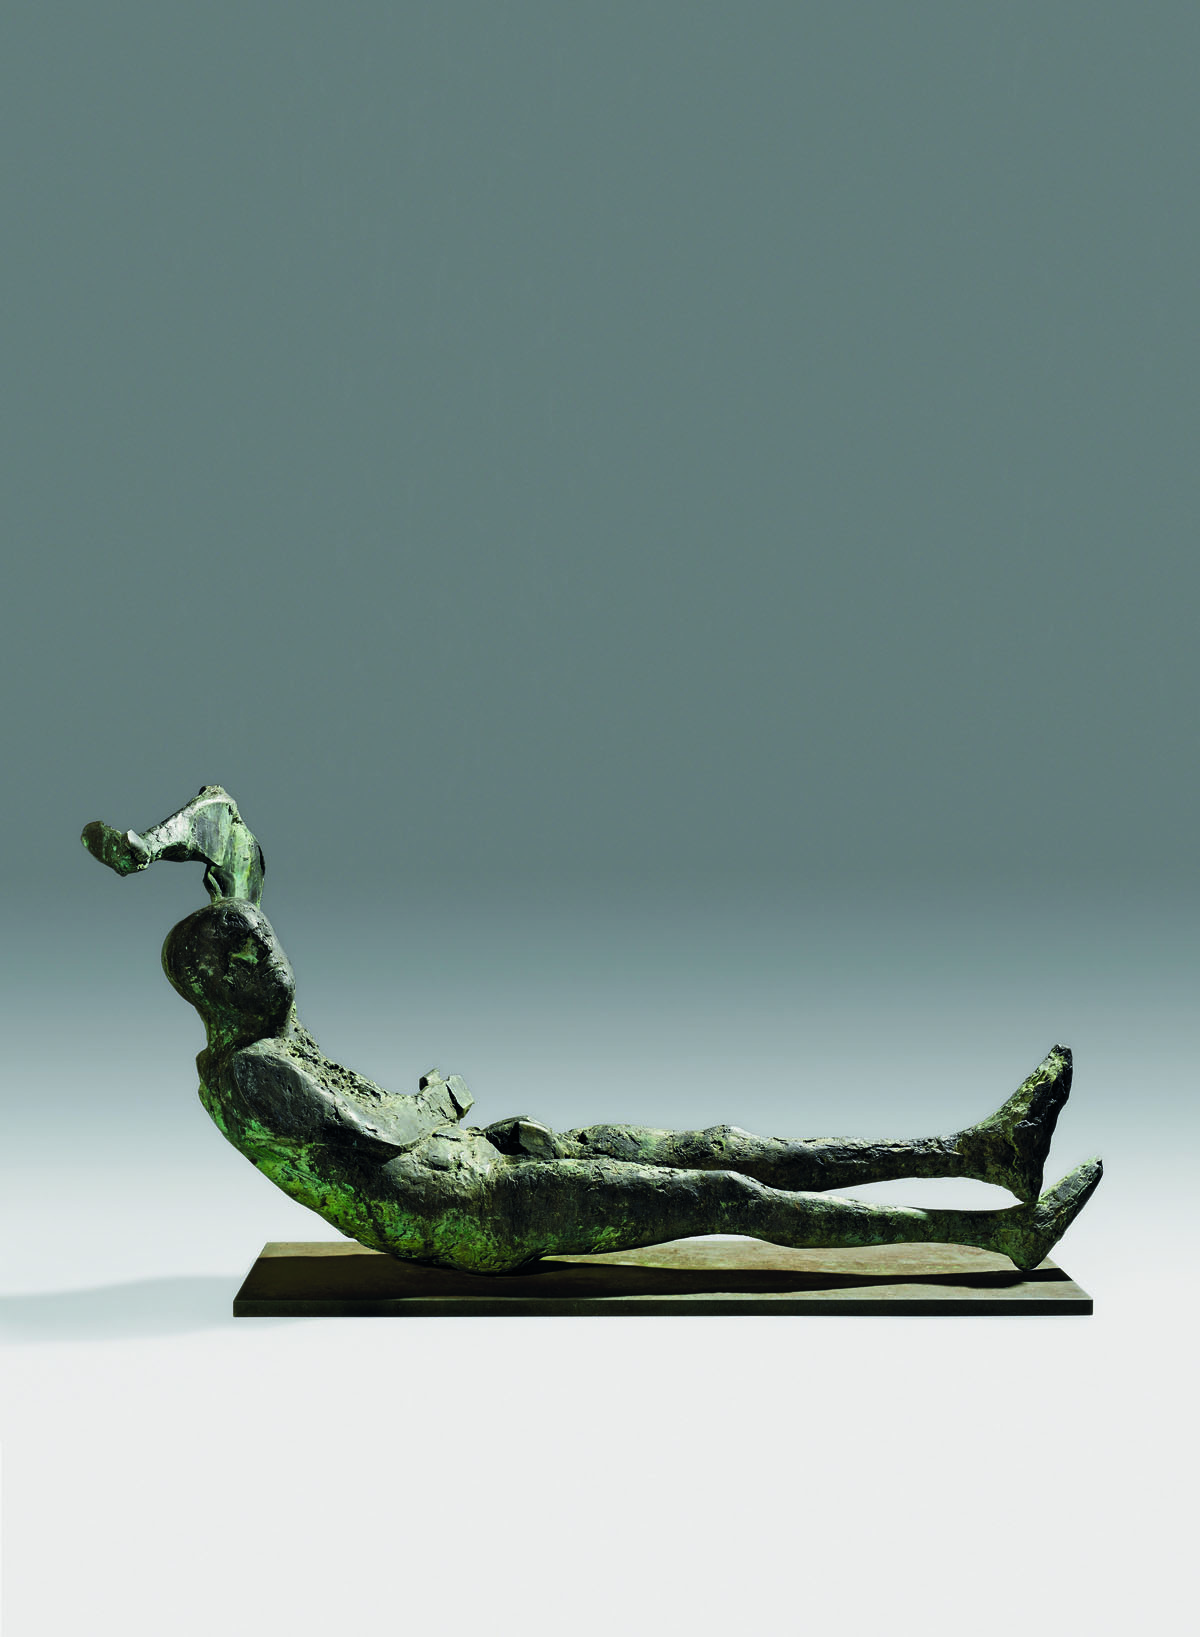 Dying King (1963), Bronze, Edition 1 of 3, H90.2 x W198.1 cm